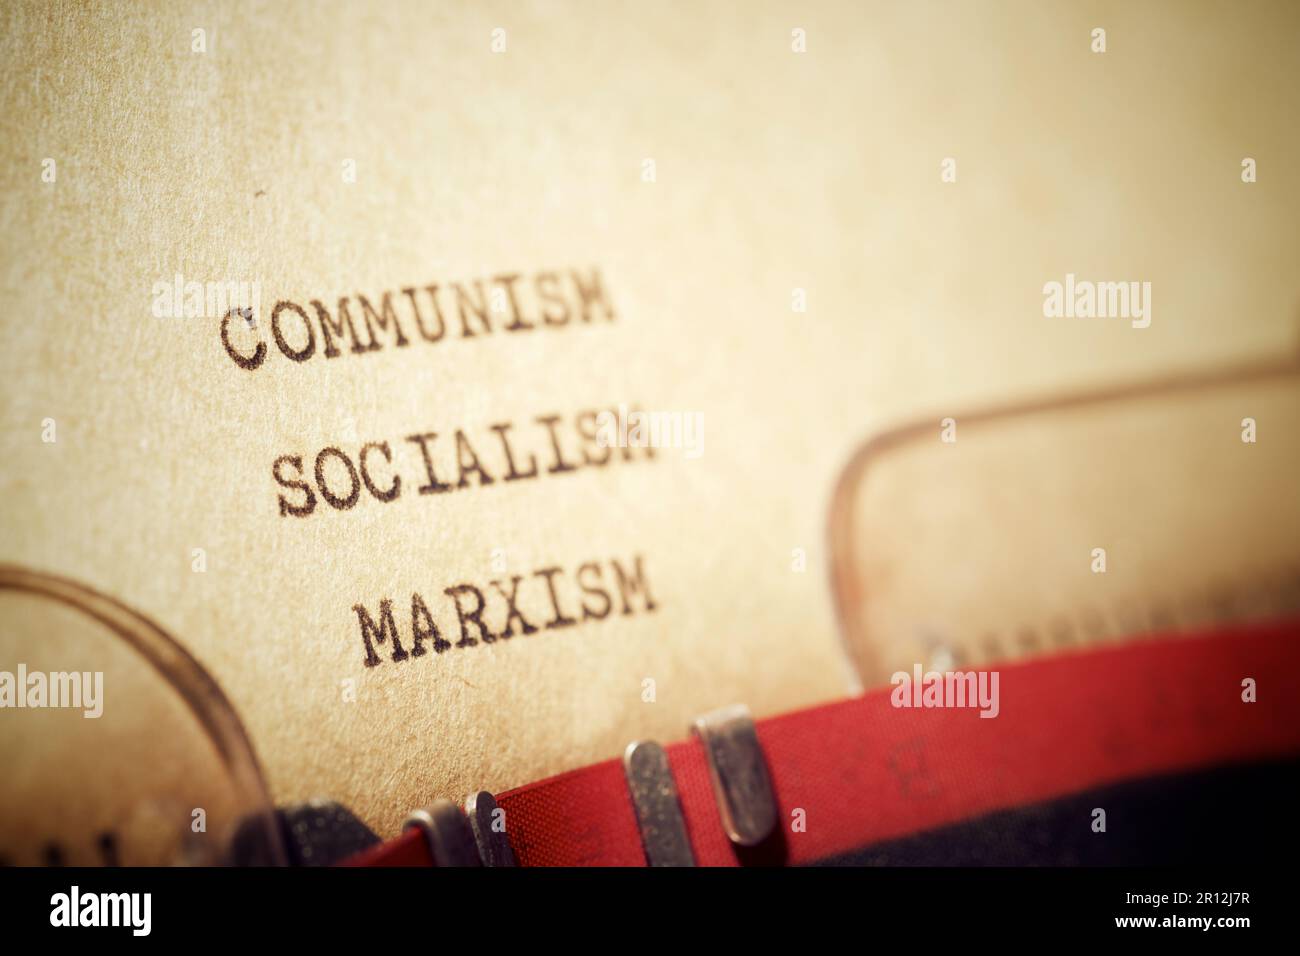 Communism Socialism Marxism text written with a typewriter. Stock Photo